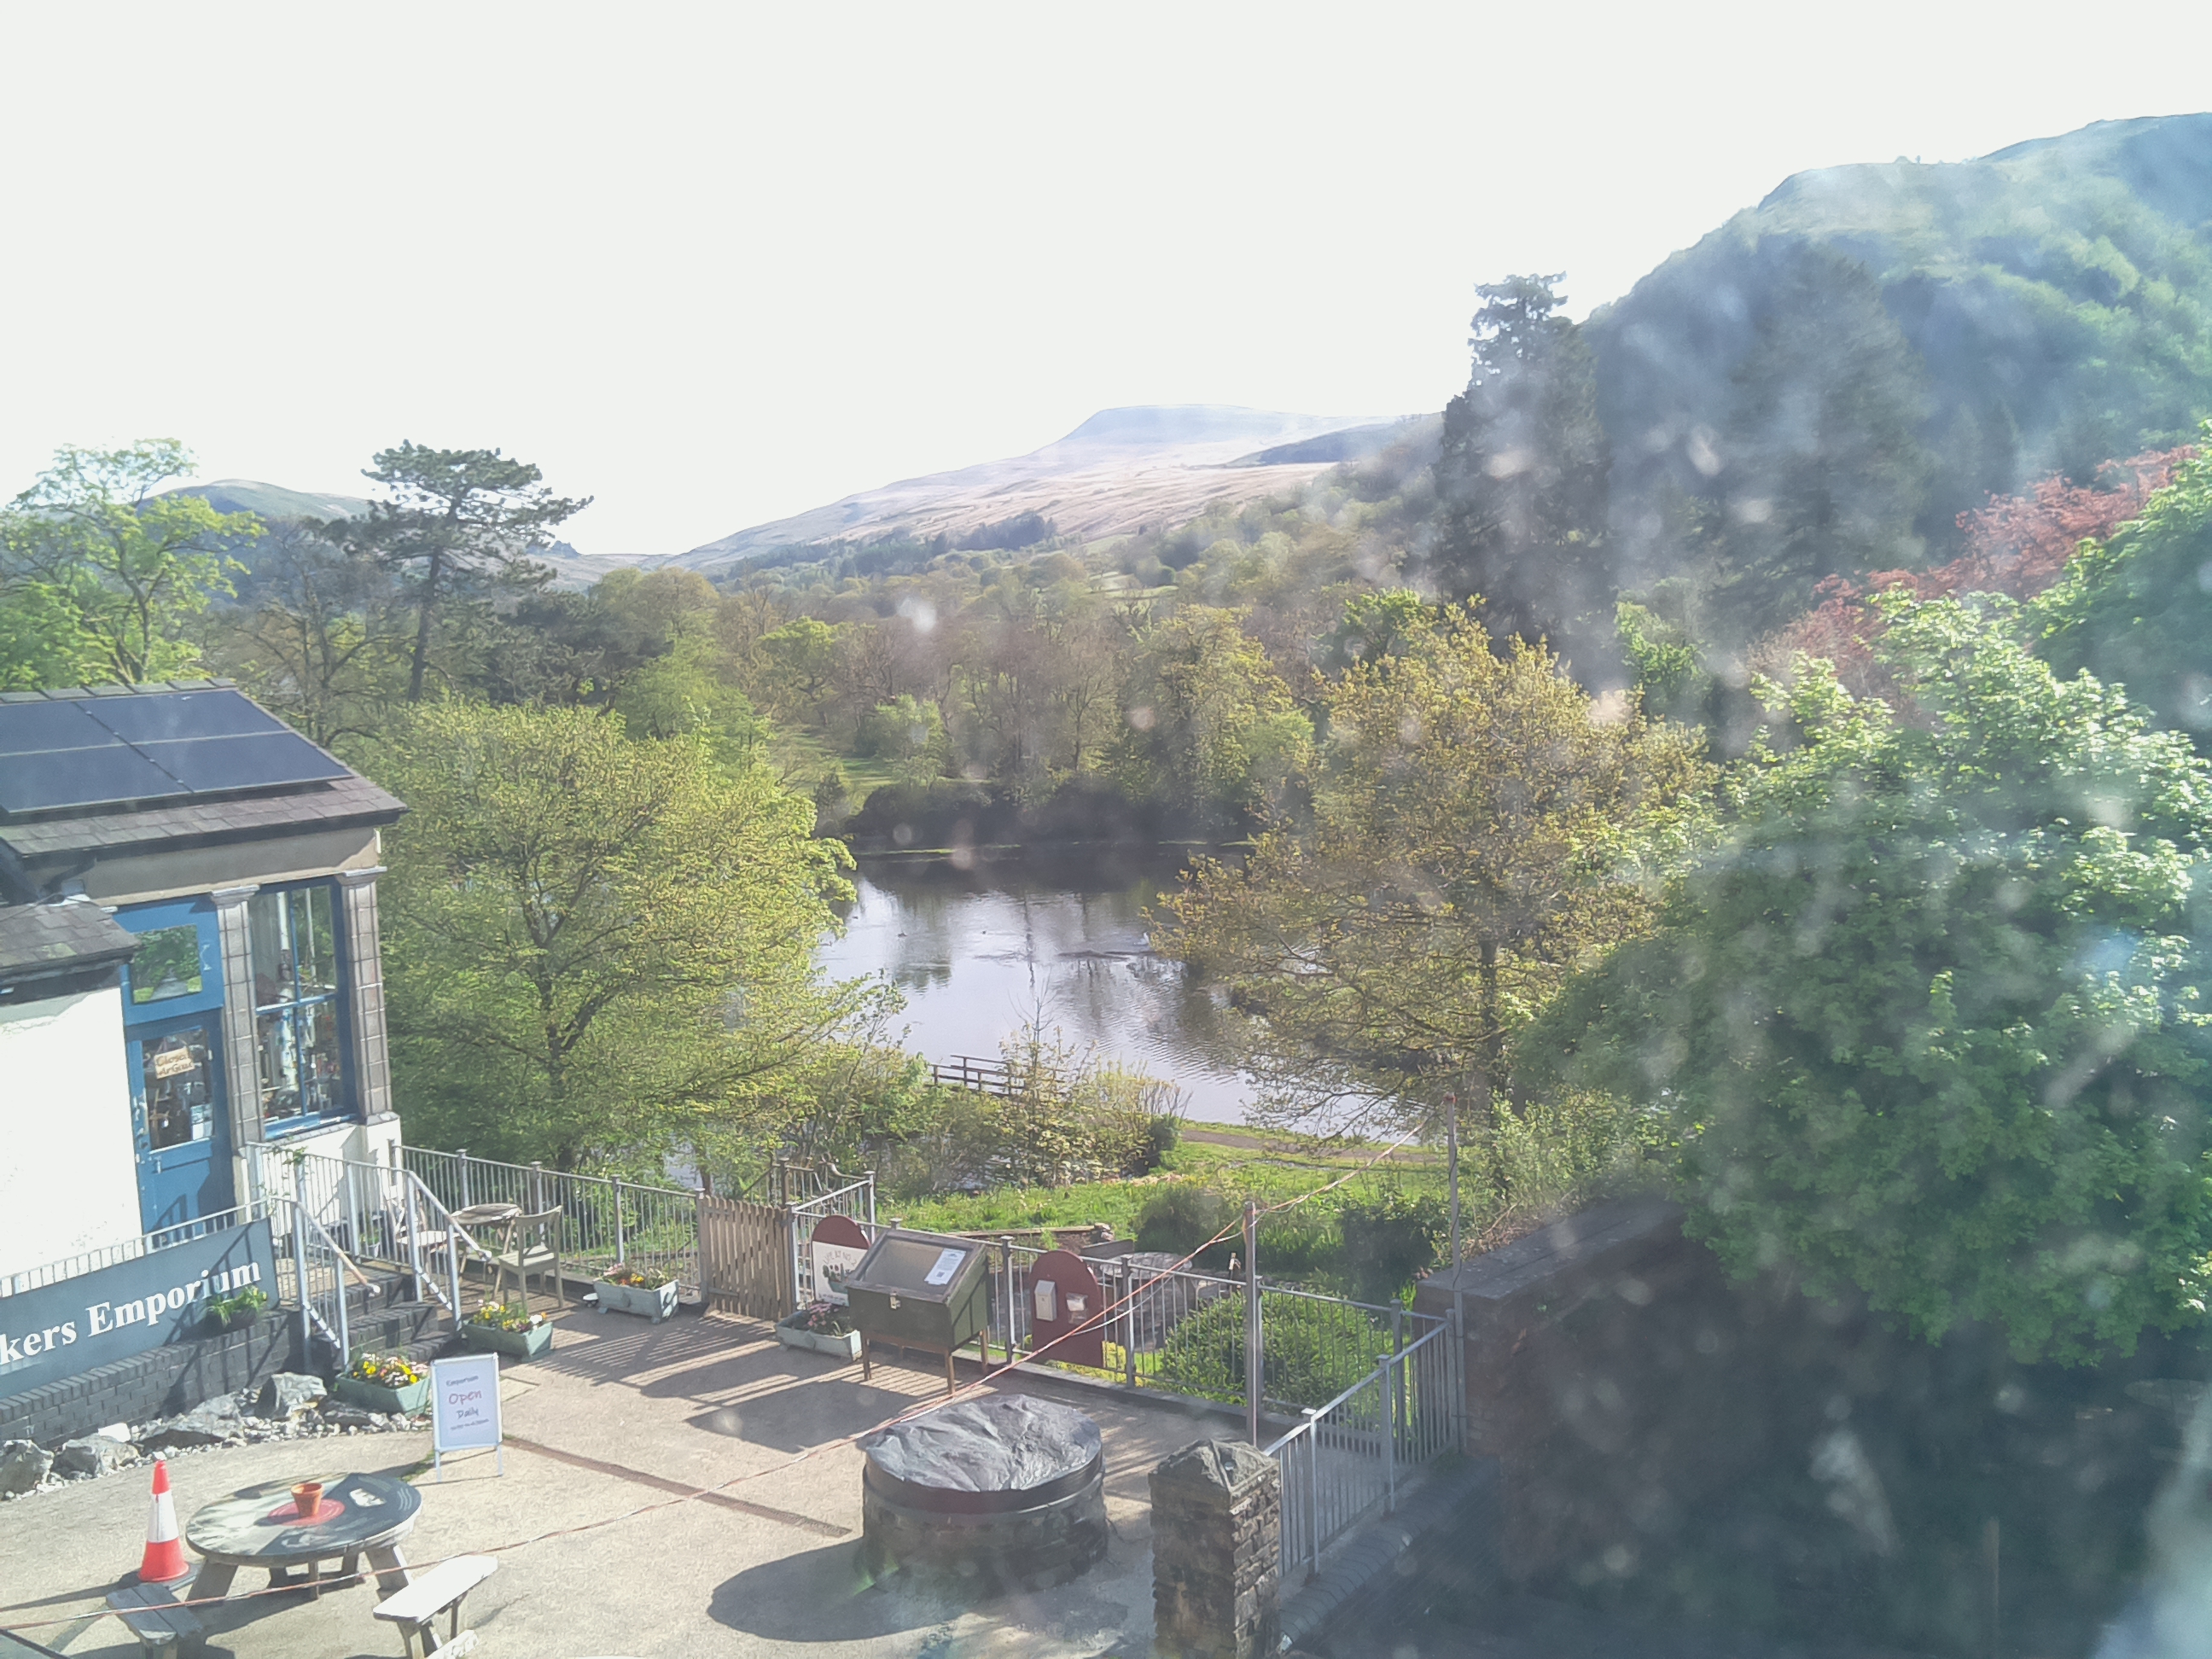 Webcam image from Craig-y-nos Country Park.